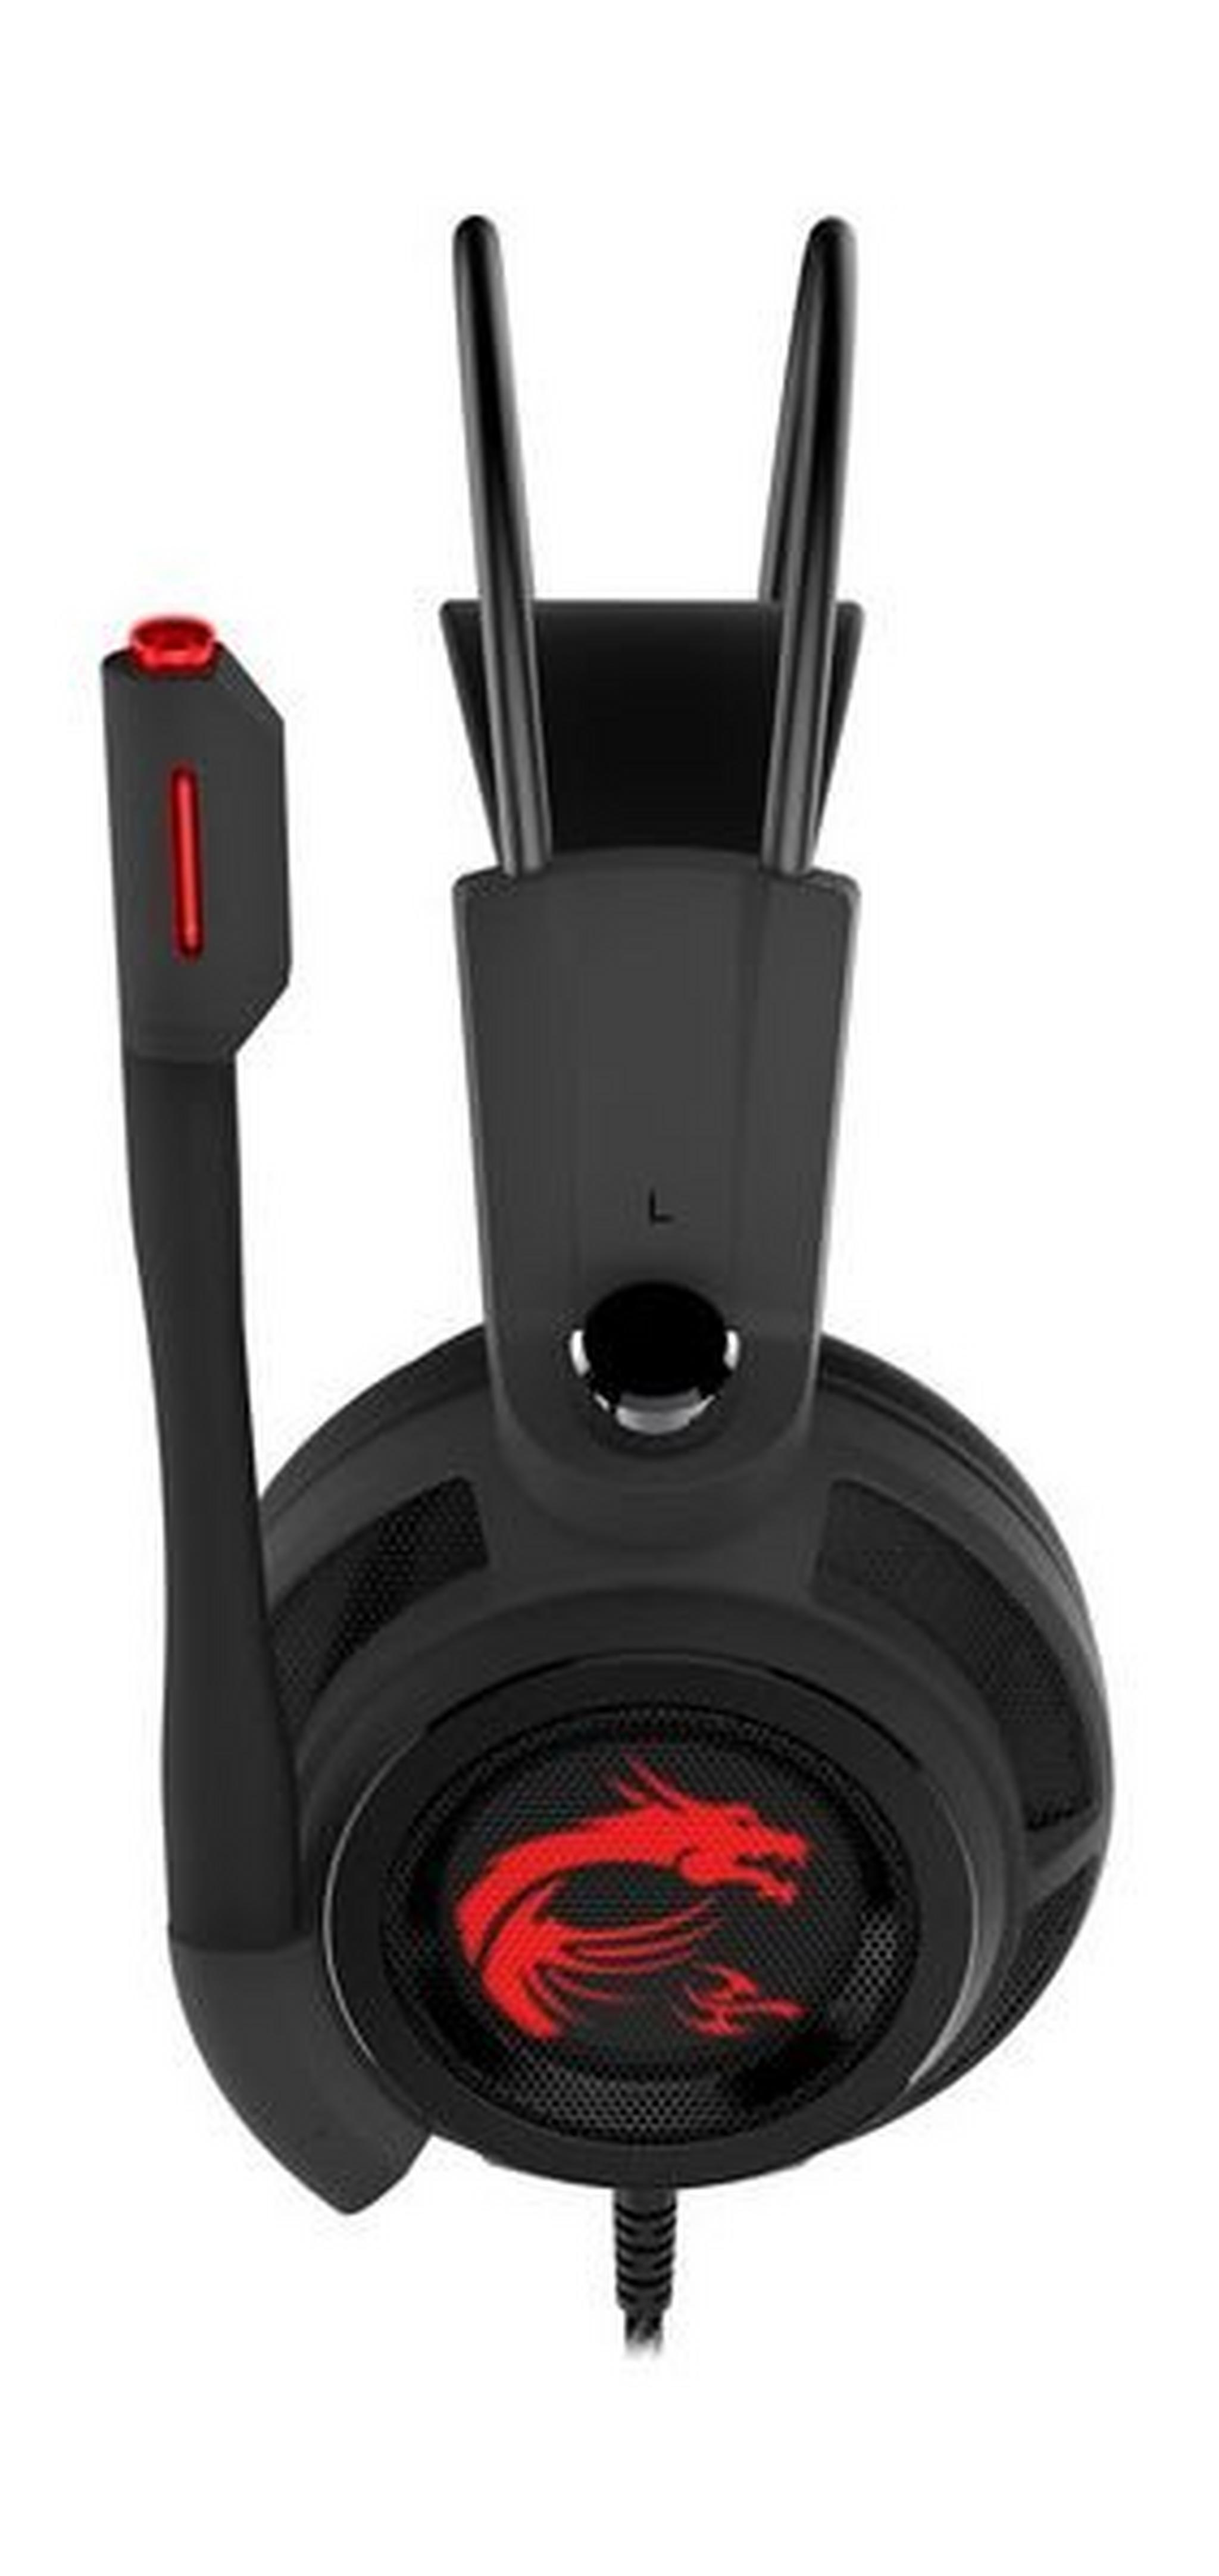 MSI Over-Ear Gaming Headset (DS502) – Black